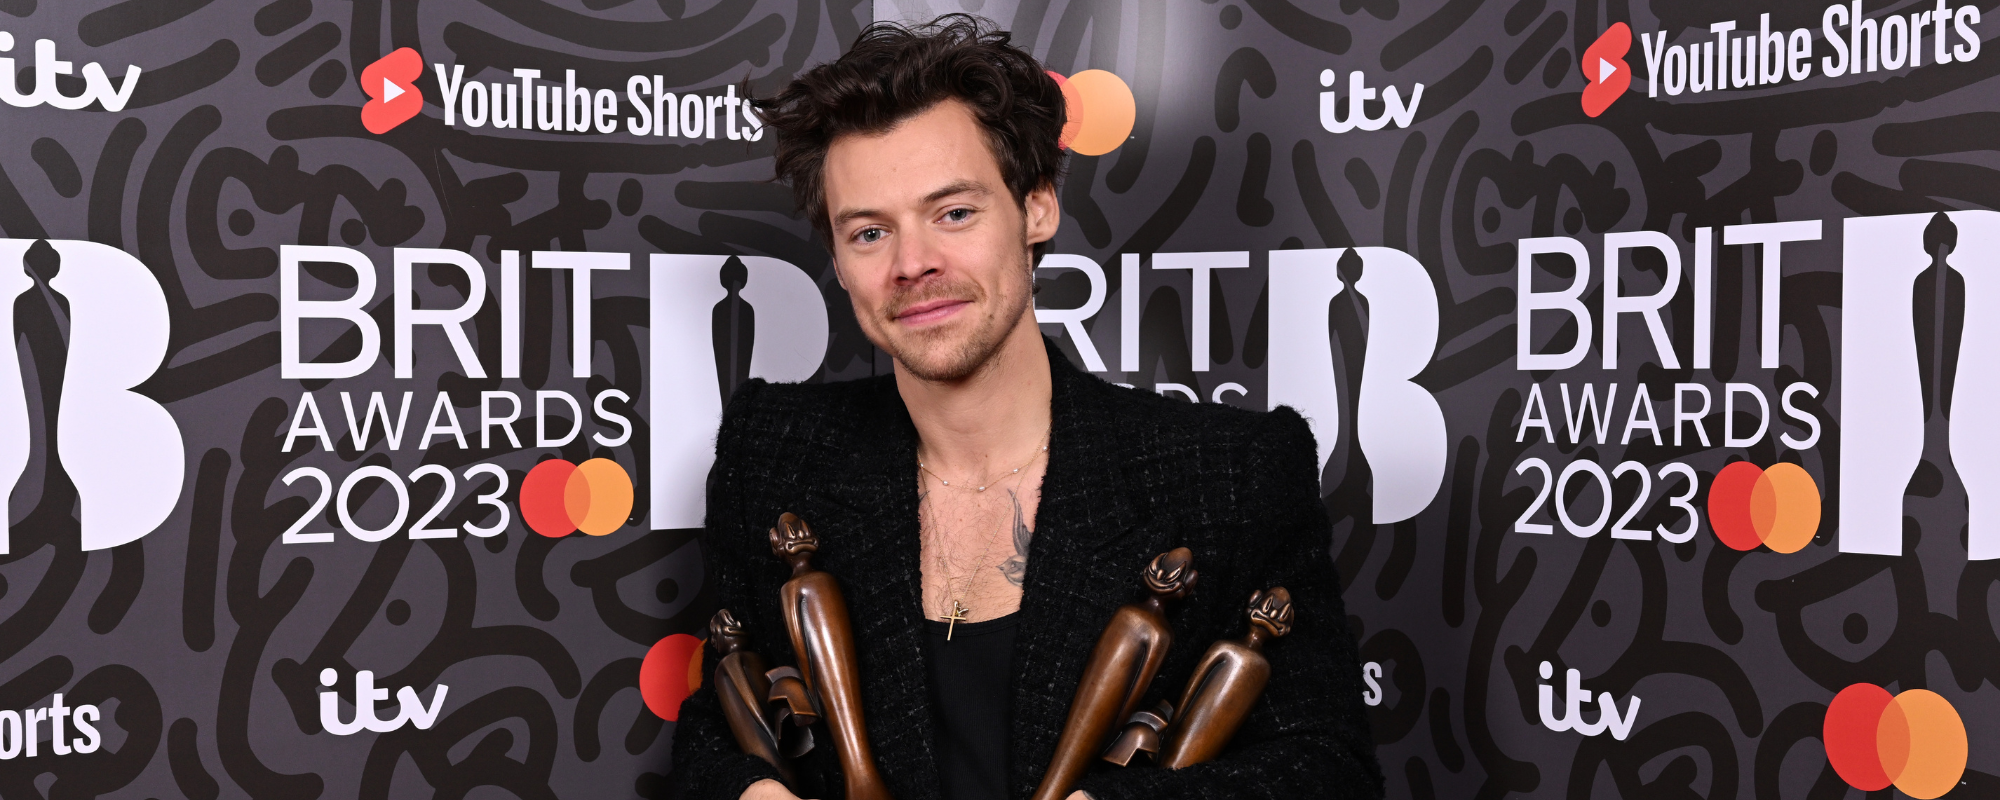 A Captivating Poem by Harry Styles to Set the Stage on Fire #HarryStyles